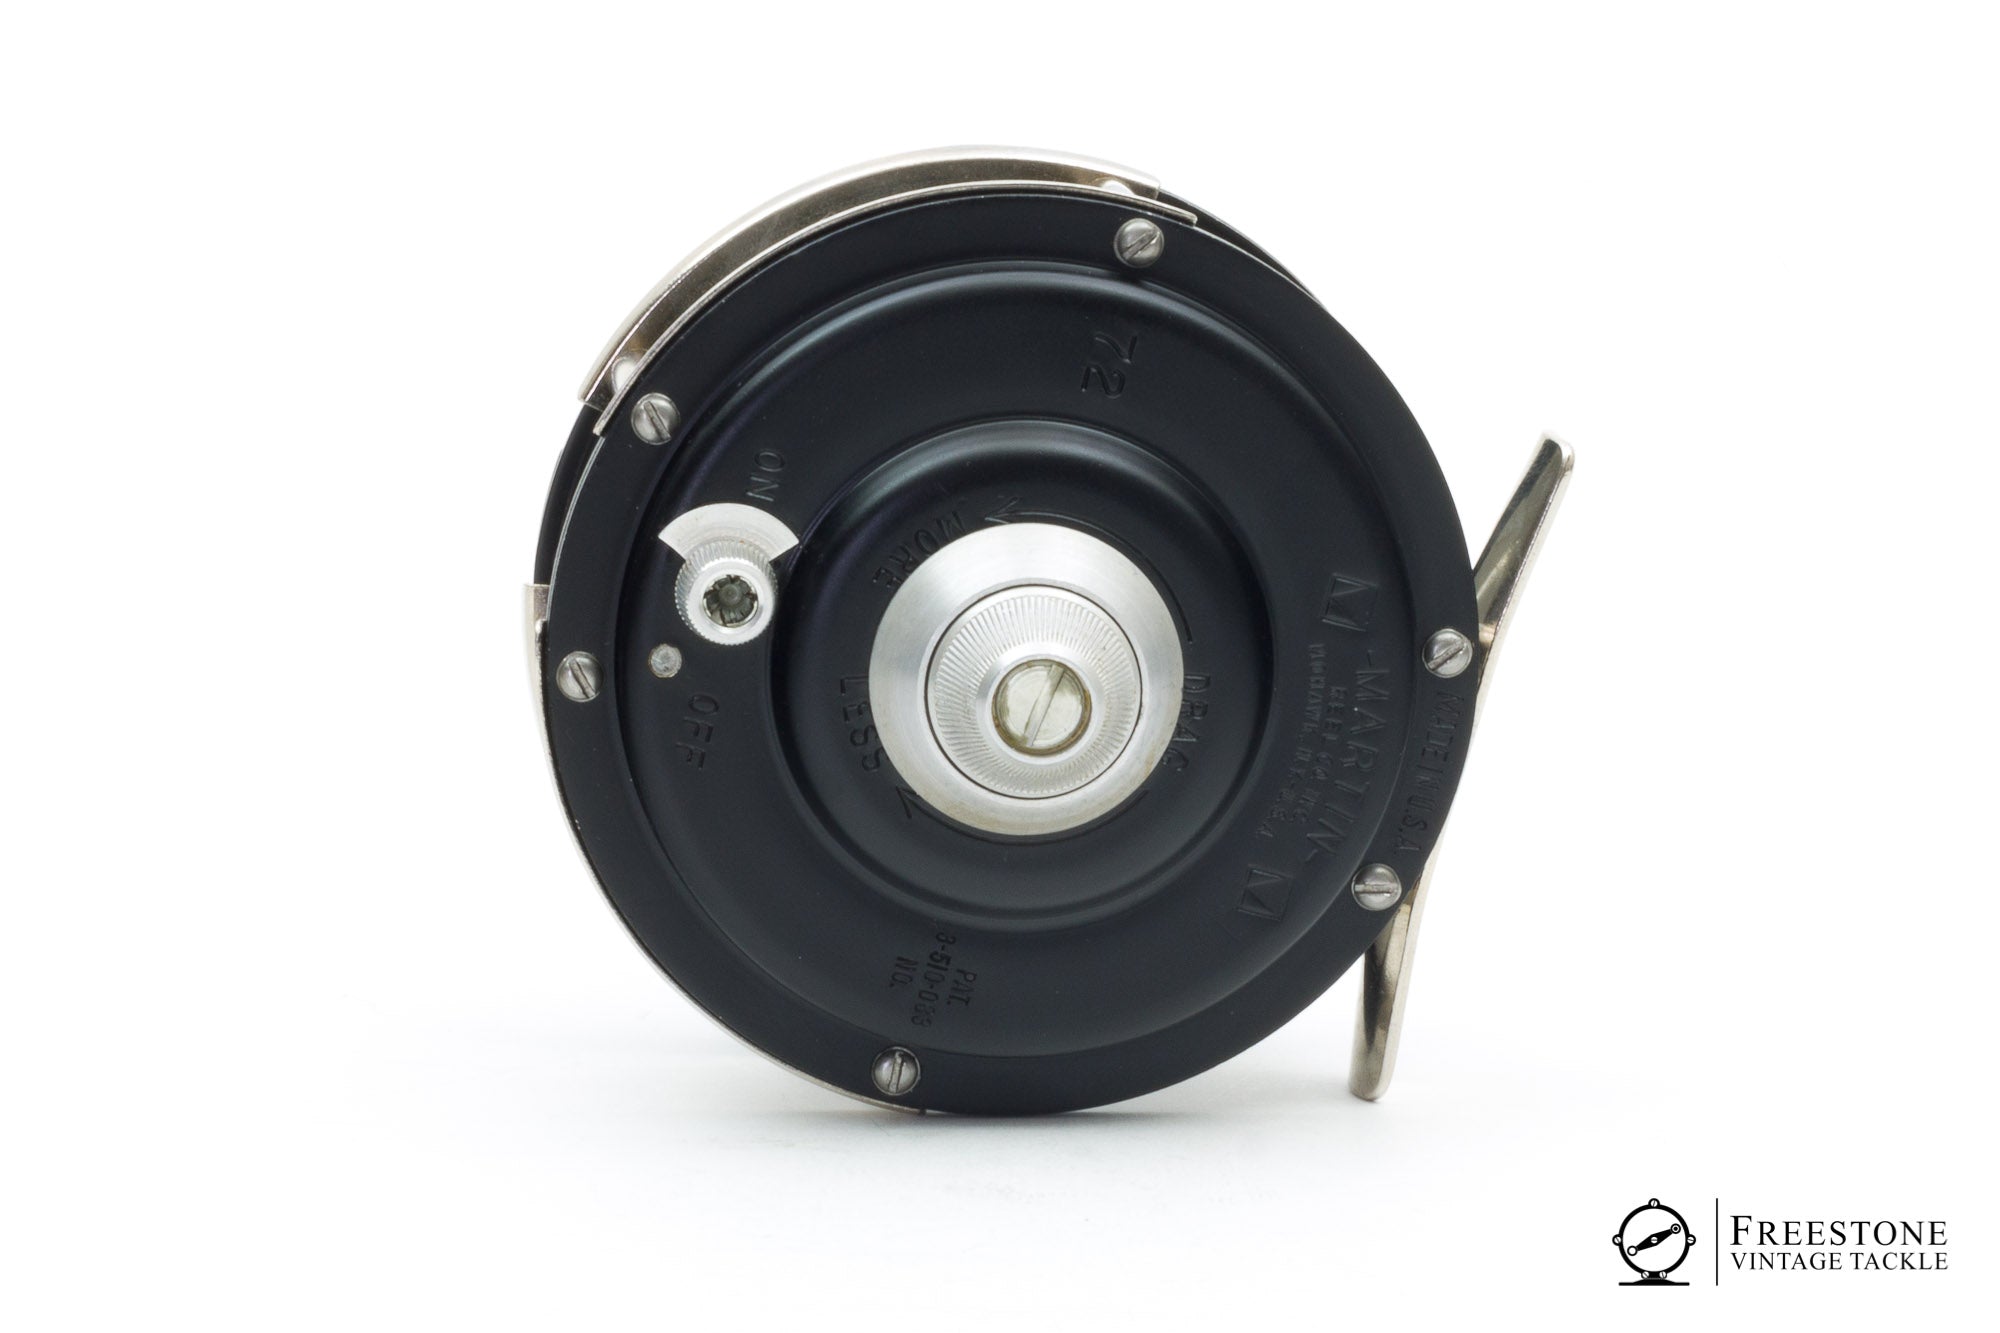 Lot 2 New Martin MR72 Multiplier Fly Reels With 4 Lines